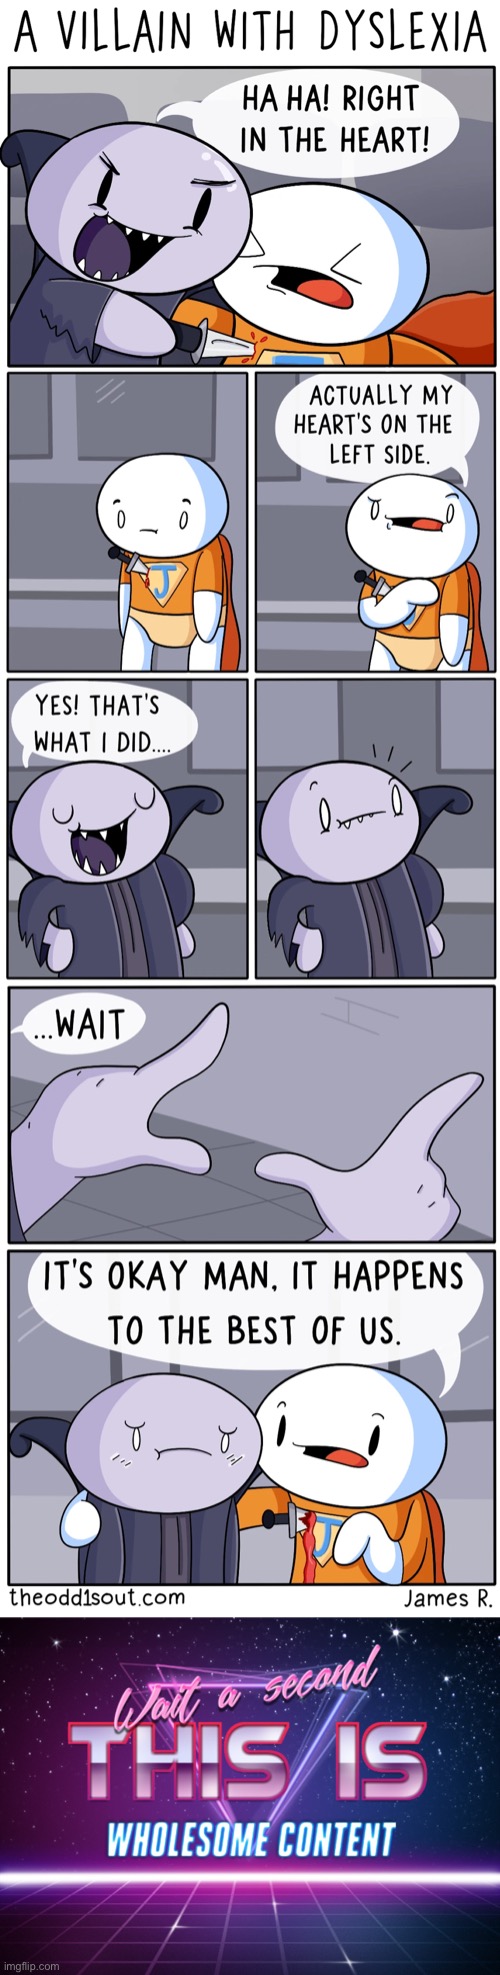 You should always support anyone with disabilities. Even if that person is a villain. | image tagged in wait a second this is wholesome content,theodd1sout,villains,dyslexia,wholesome,memes | made w/ Imgflip meme maker